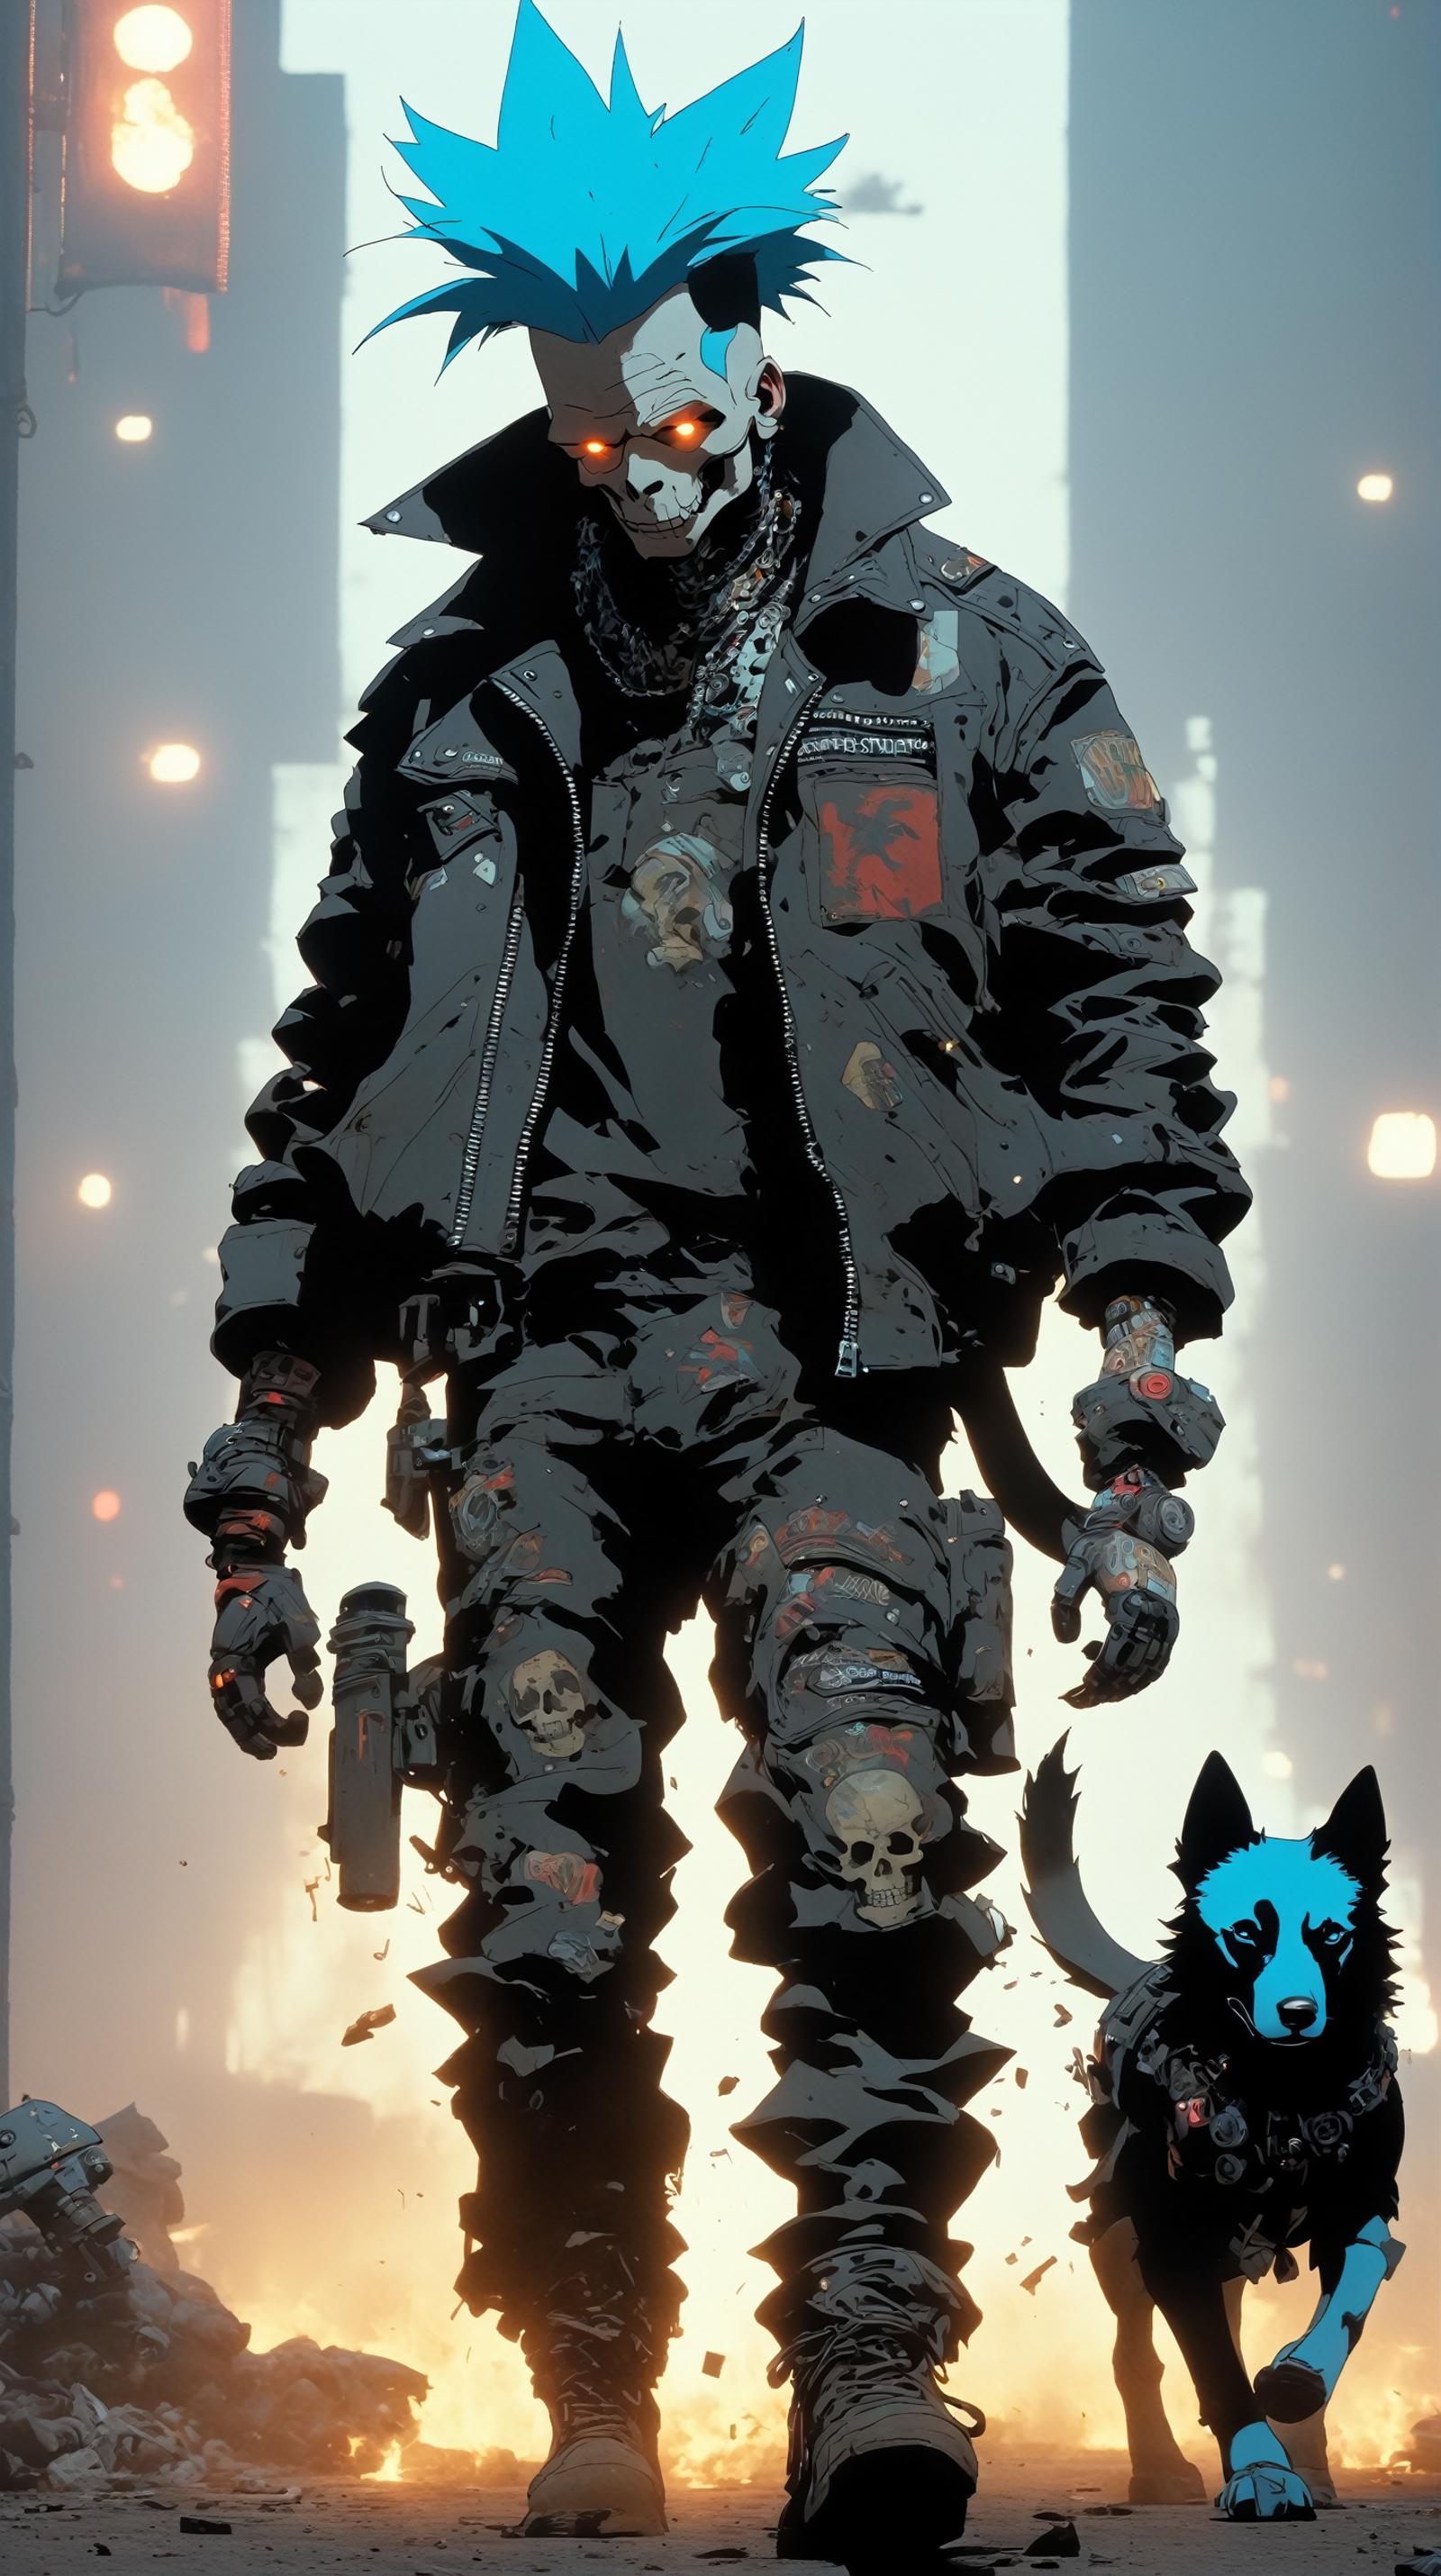 A man in a black jacket, with a skull on his sleeve, and a cat nearby.